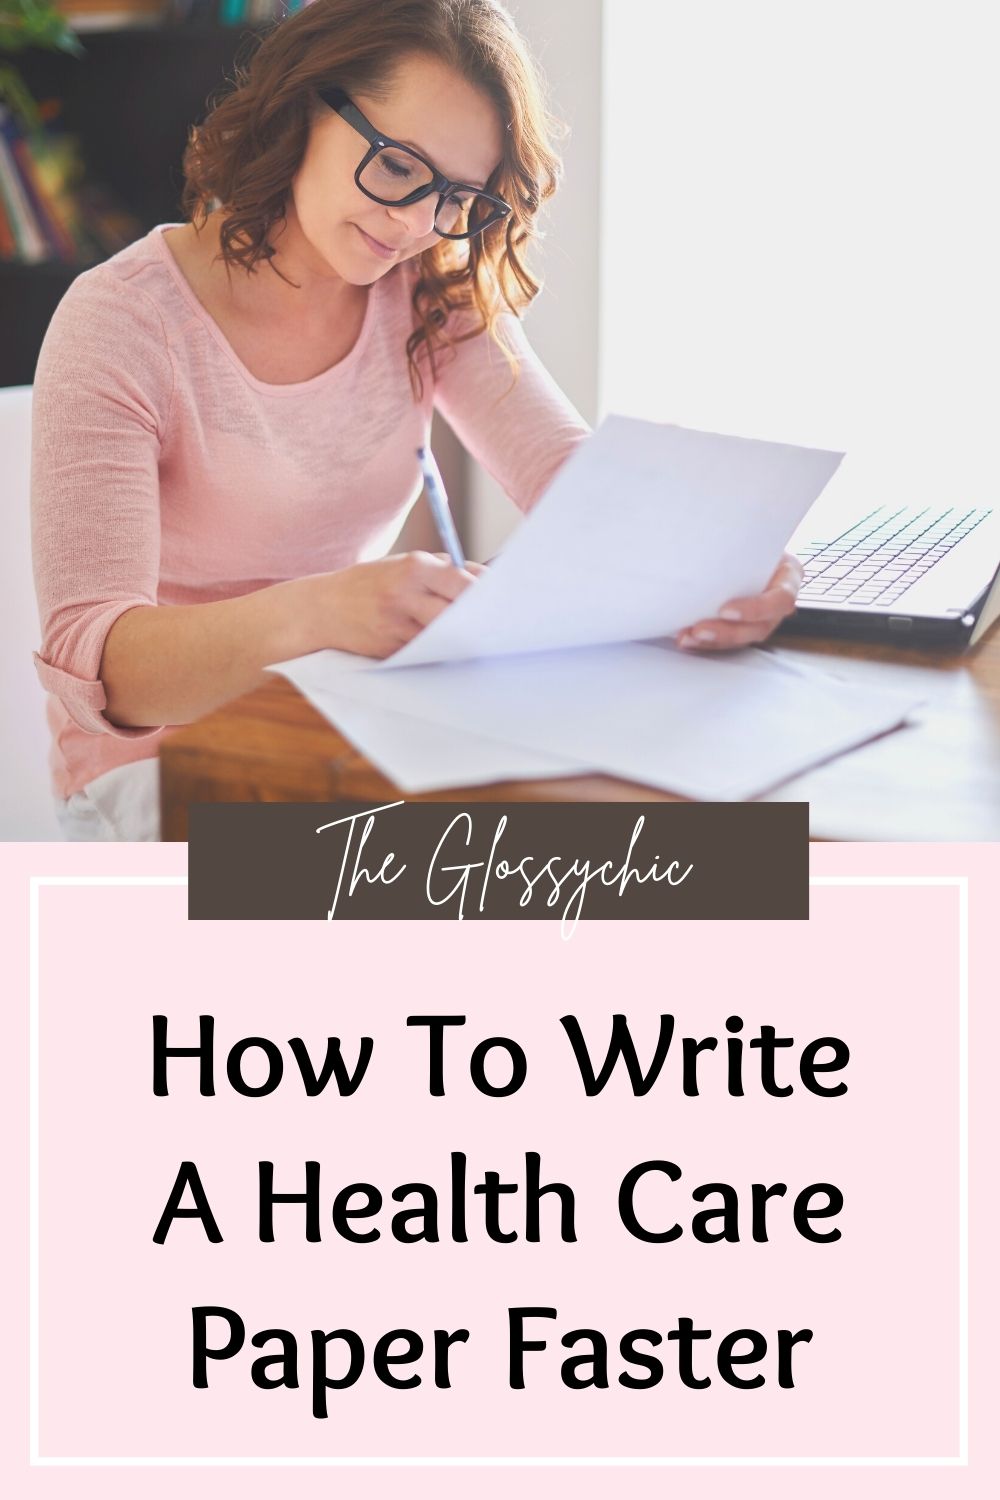 How To Write A Health Care Paper Faster